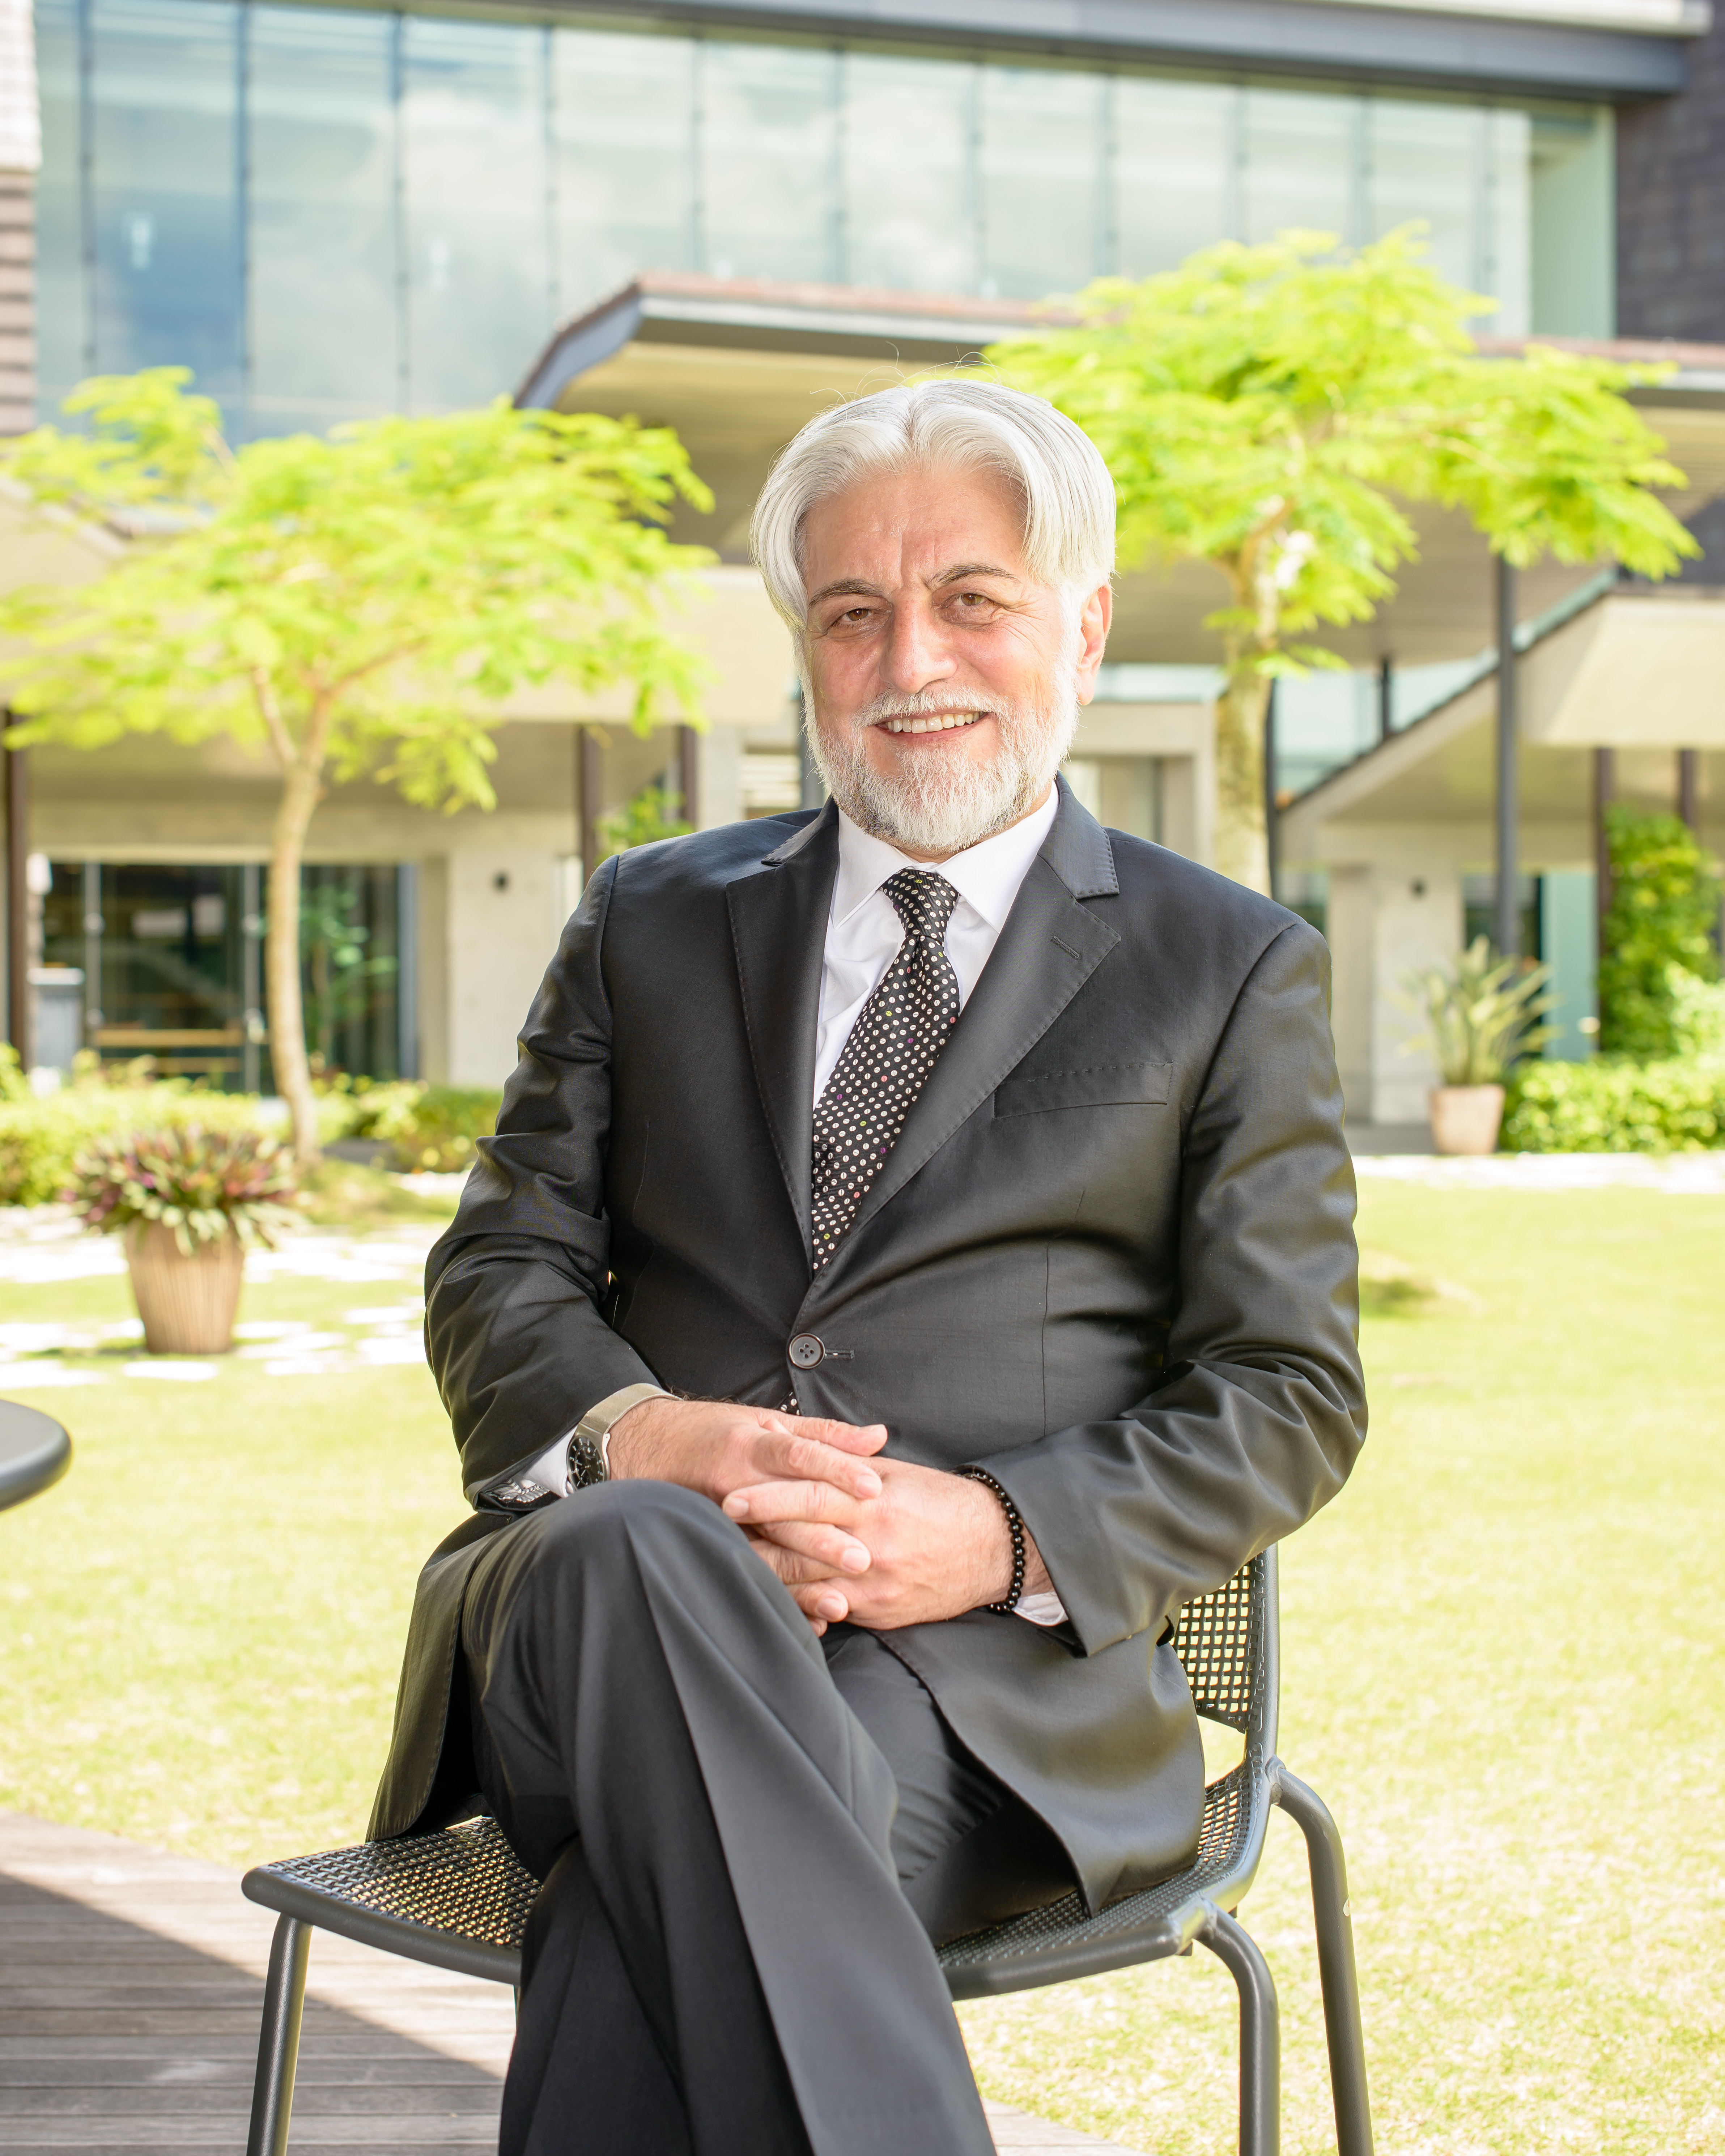 Ali Ganjehlou, the new Vice President, the Buildings and Facilities Management Division